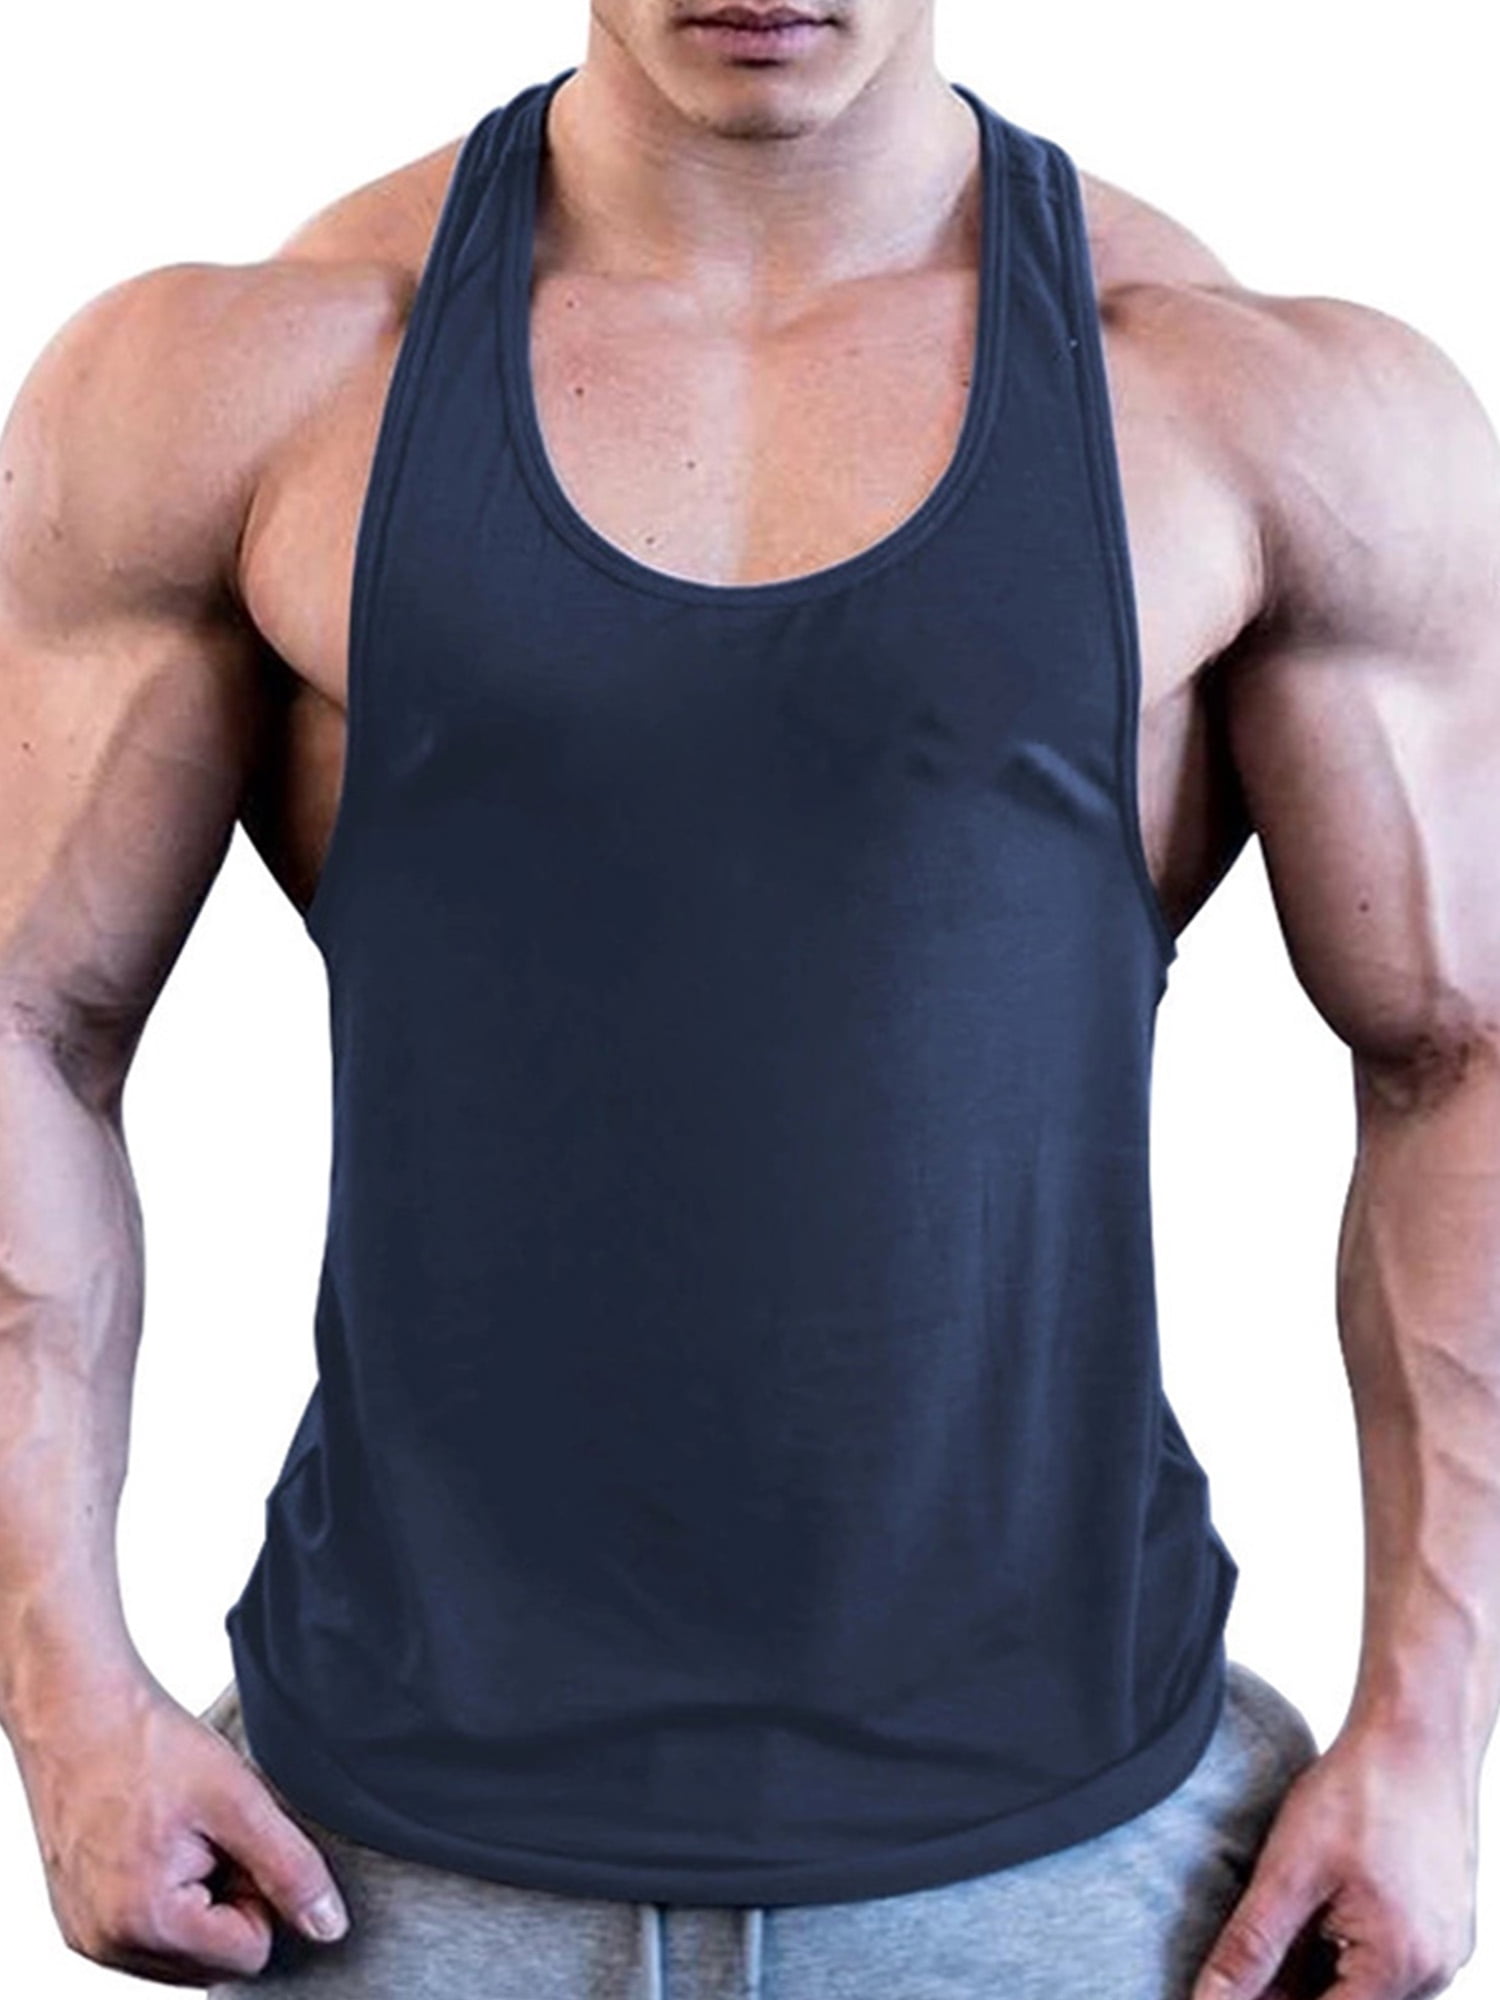 Athletic Sports Training Tank Cool Base Wicks Moisture Away Athletic Shirt 17 Colors in 9 Youth/Adult Sizes 